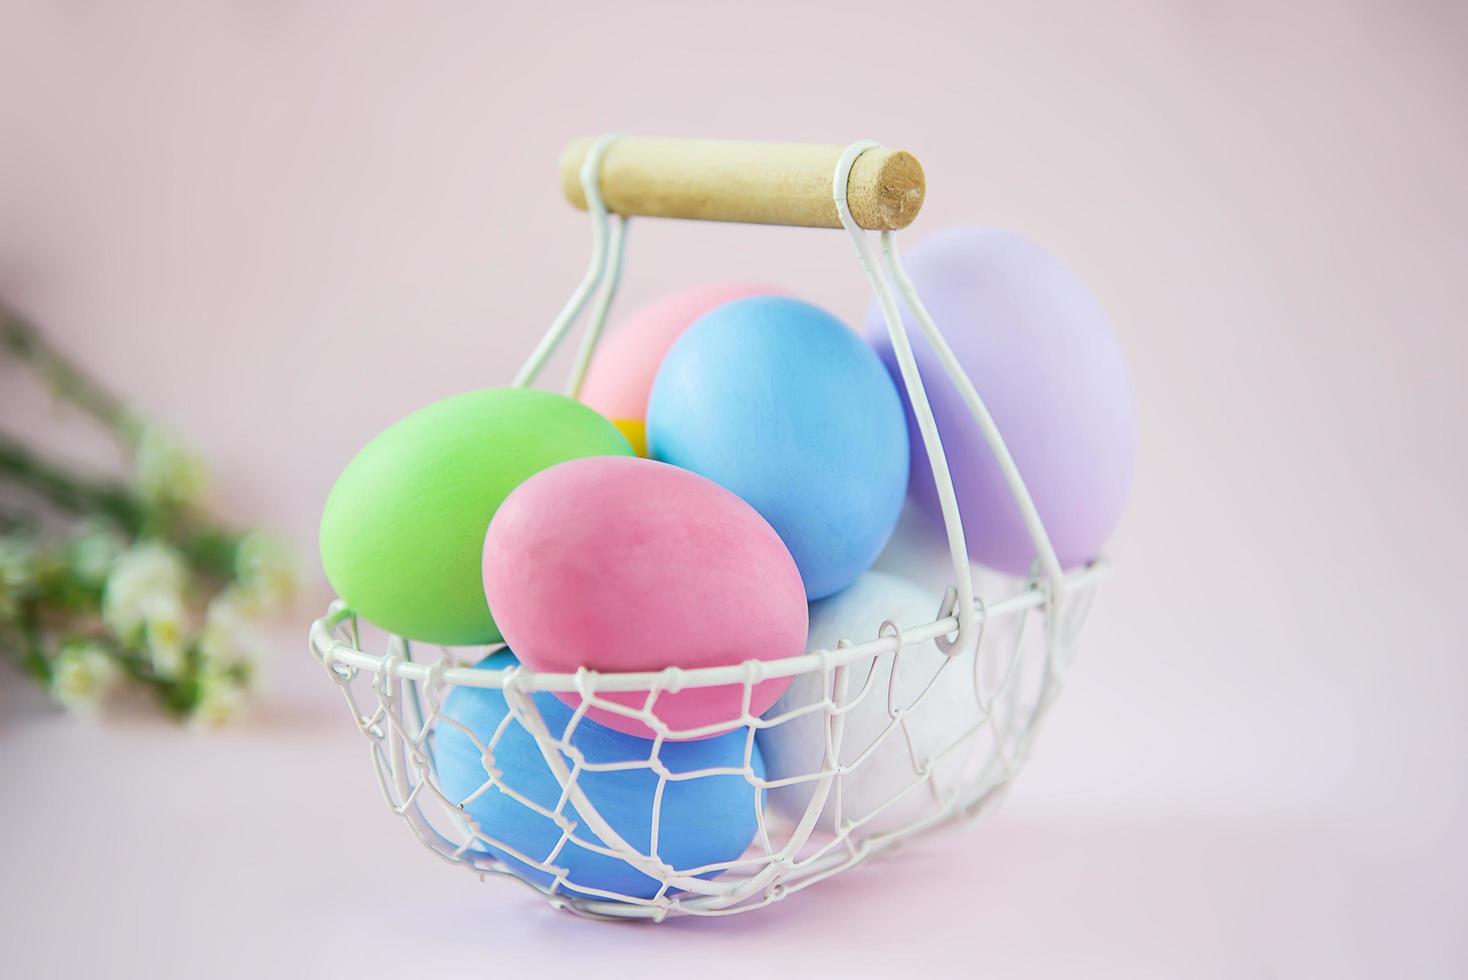 Sweet colorful Easter eggs background - national holiday celebration concepts photo